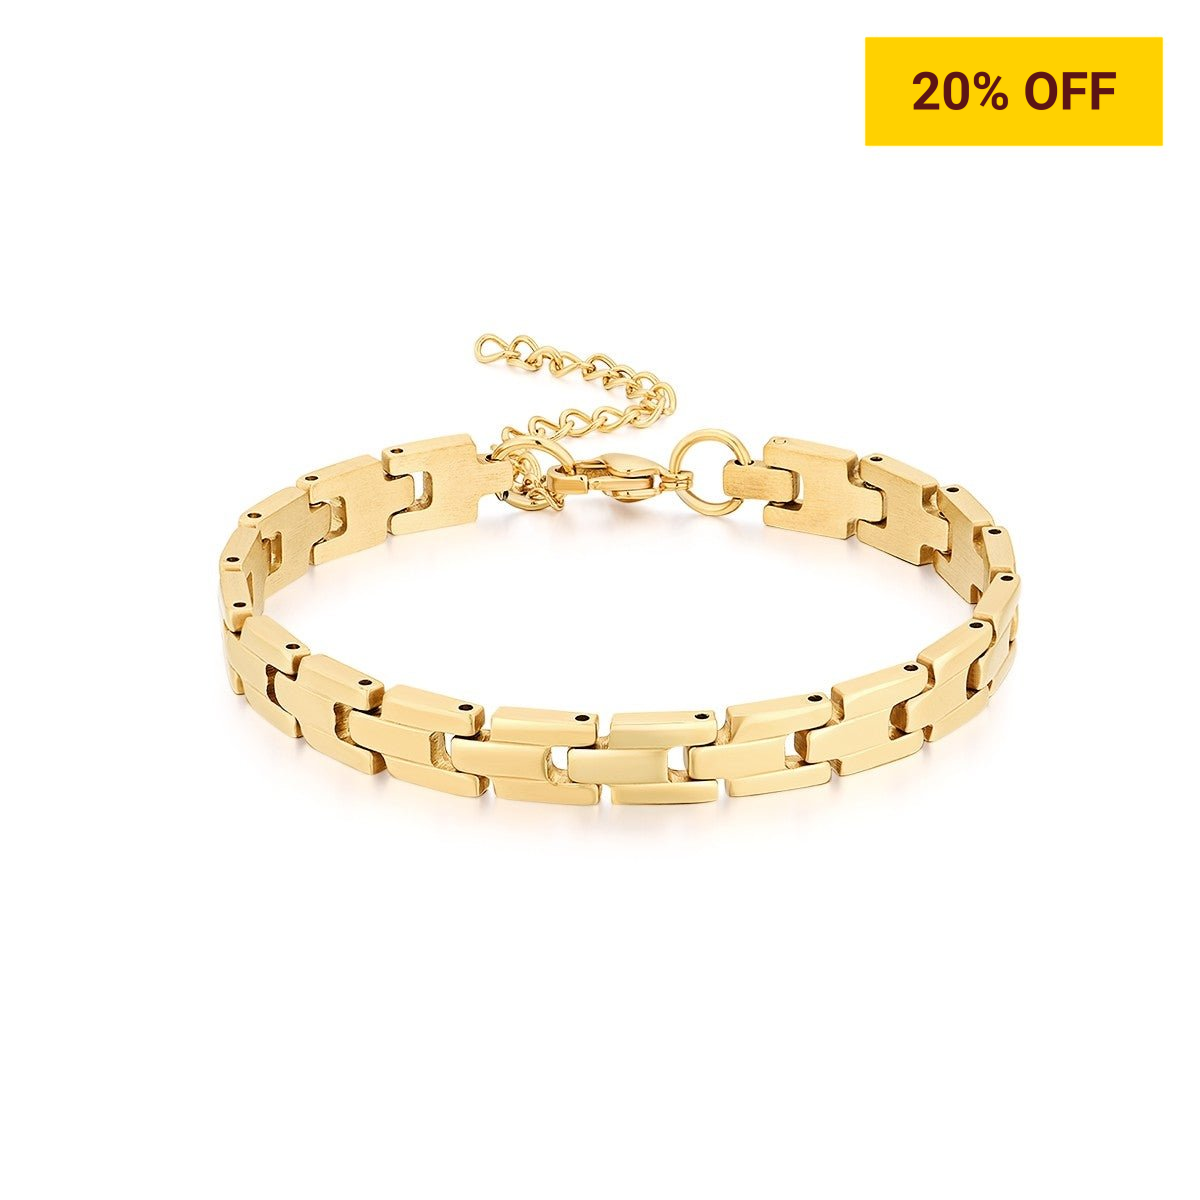 Chunky Chain Link Bracelet in Worn Gold - Evelie Blu Boutique